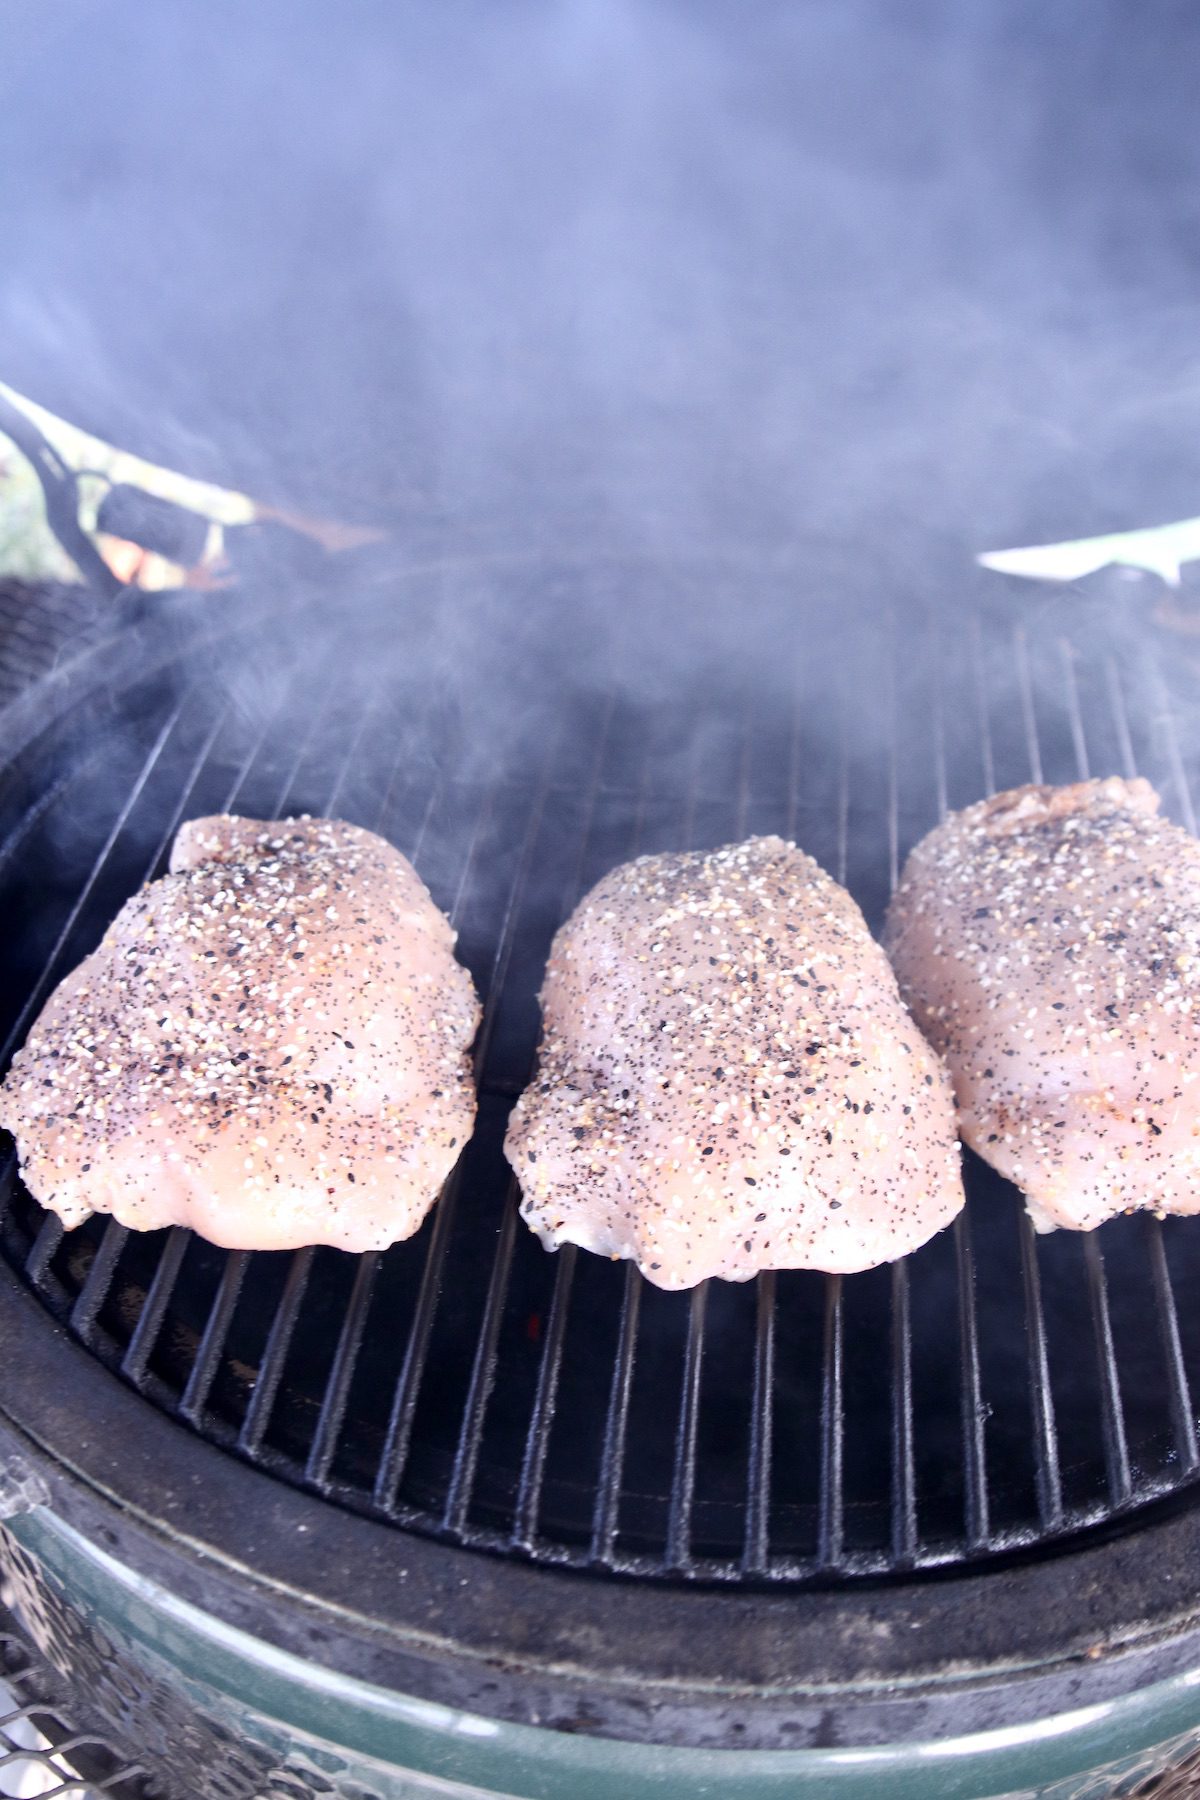 3 stuffed chicken breasts on a grill